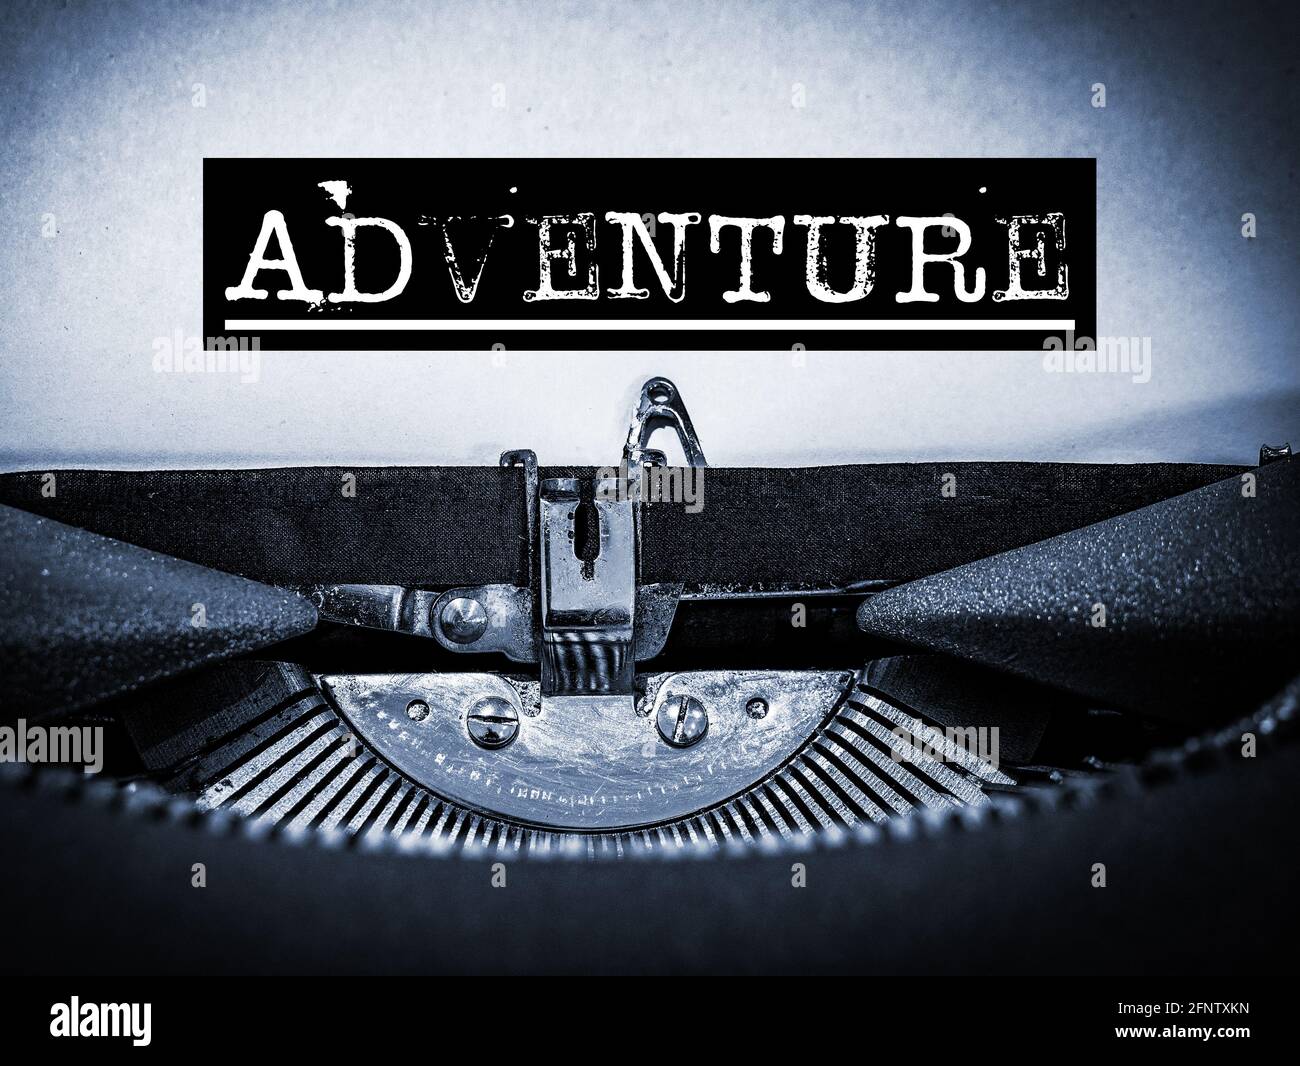 Adventure displayed on a vintage typewriter with underline script and black border in a blue tone Stock Photo